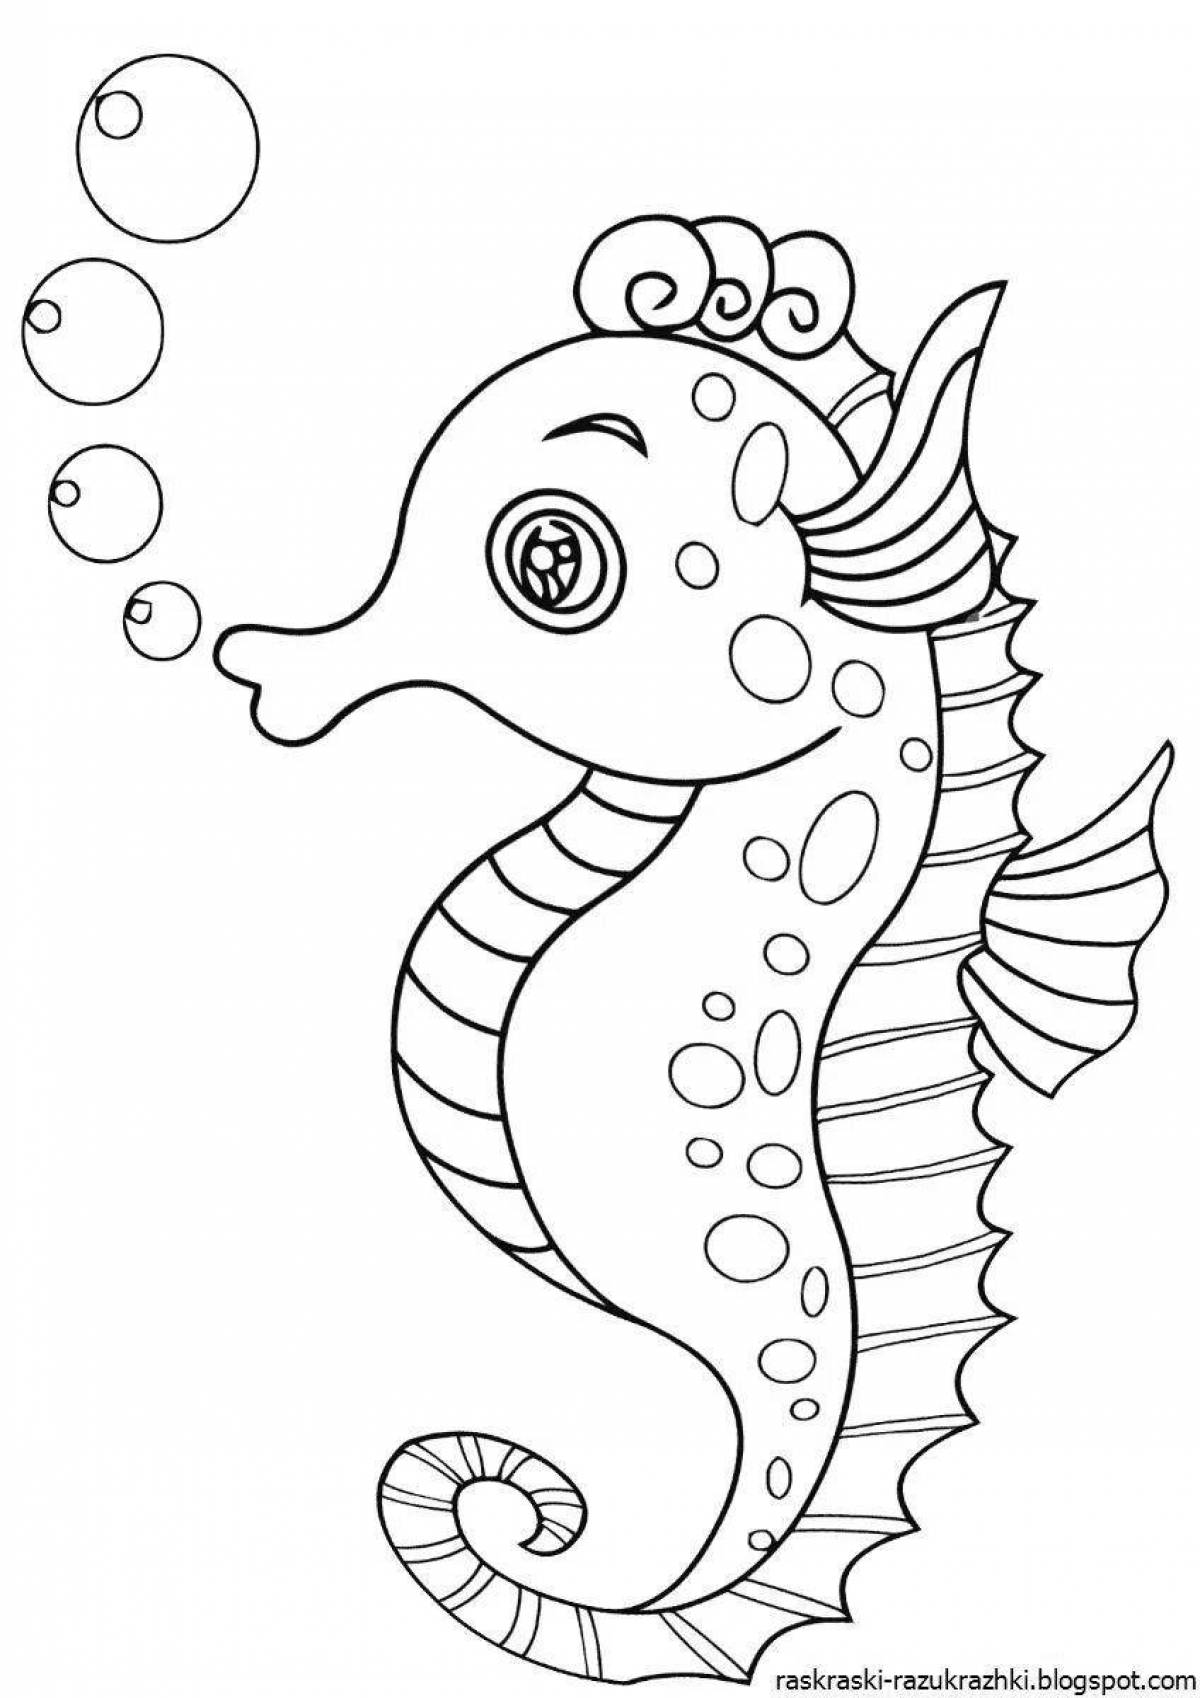 Amazing marine life coloring book for kids 5-6 years old